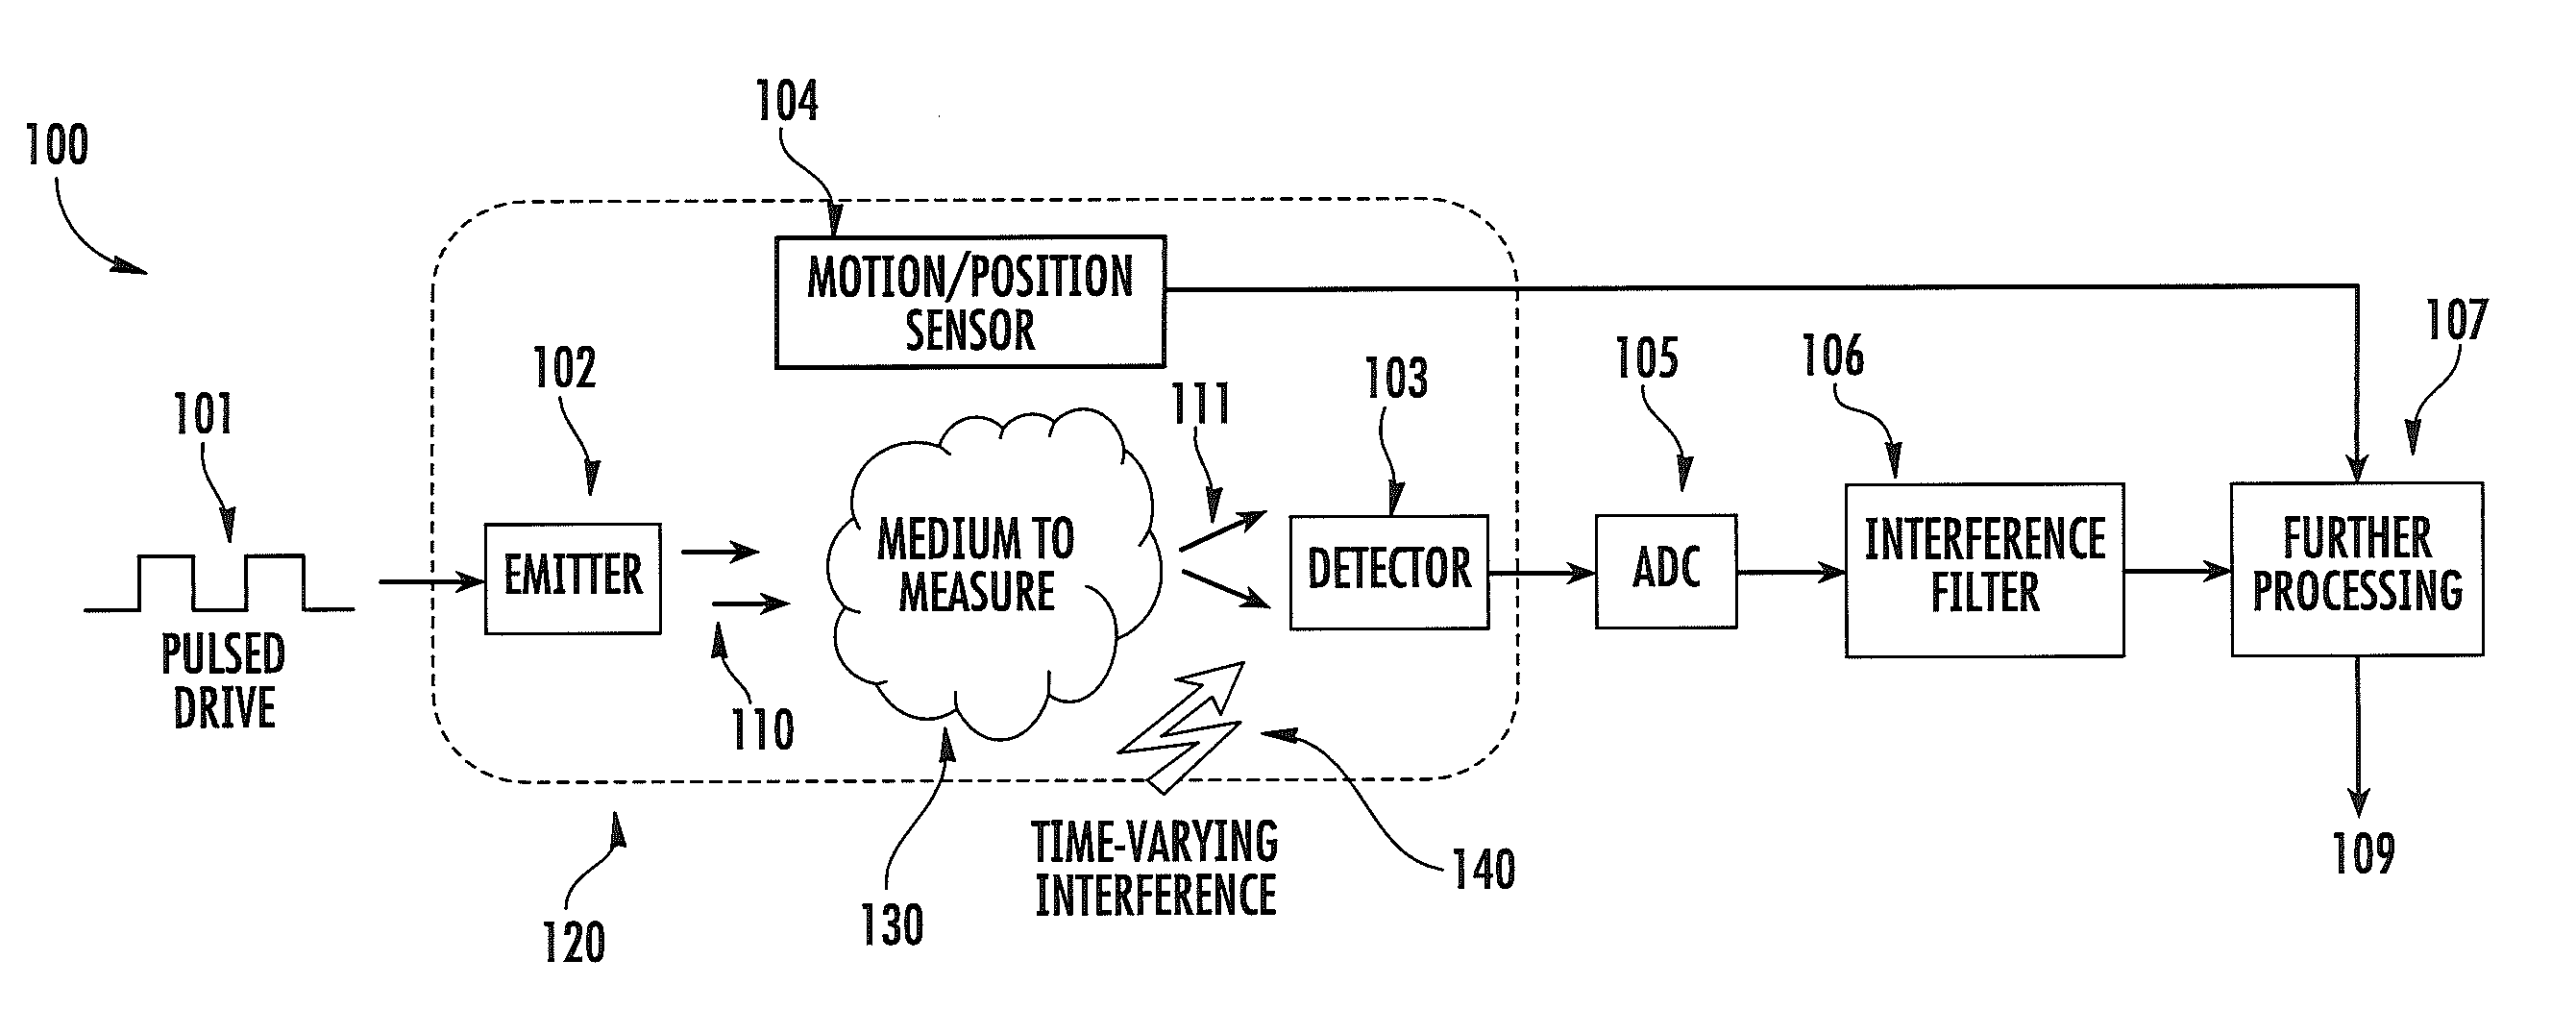 Apparatus and methods for monitoring physiological data during environmental interference